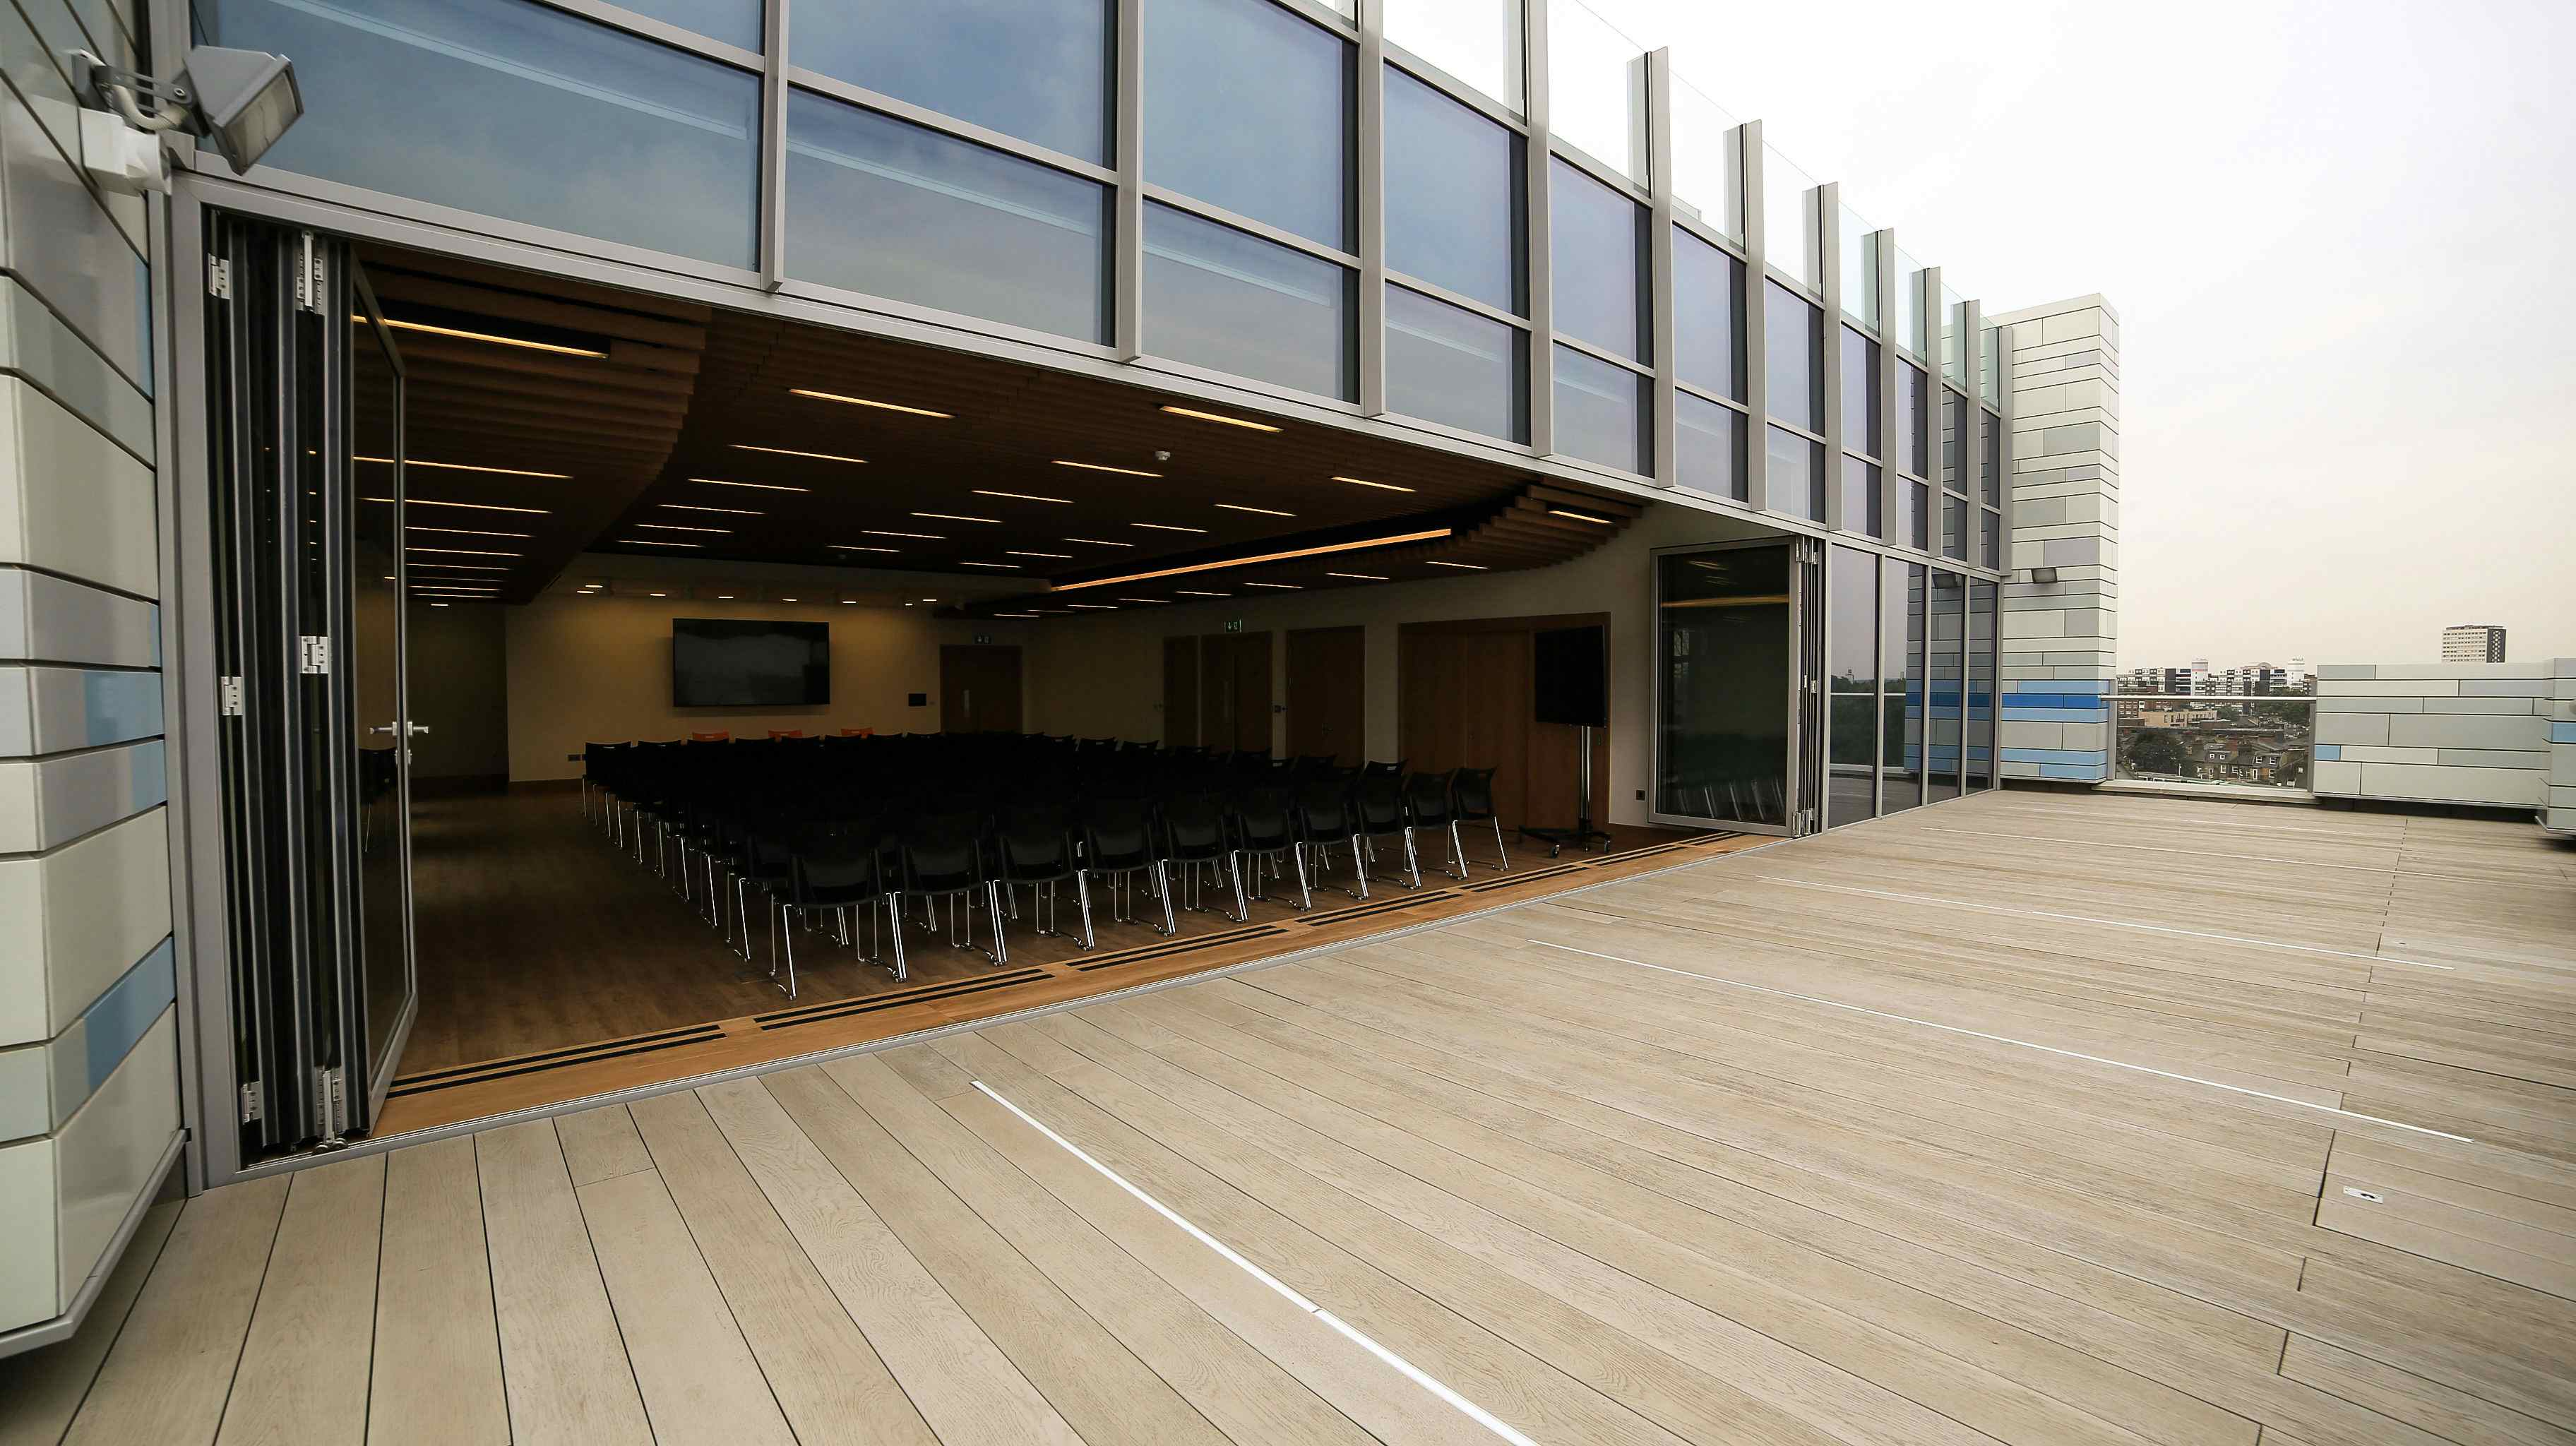 Auditorium Space with Balcony Views , Battersea Dogs & Cats Home 